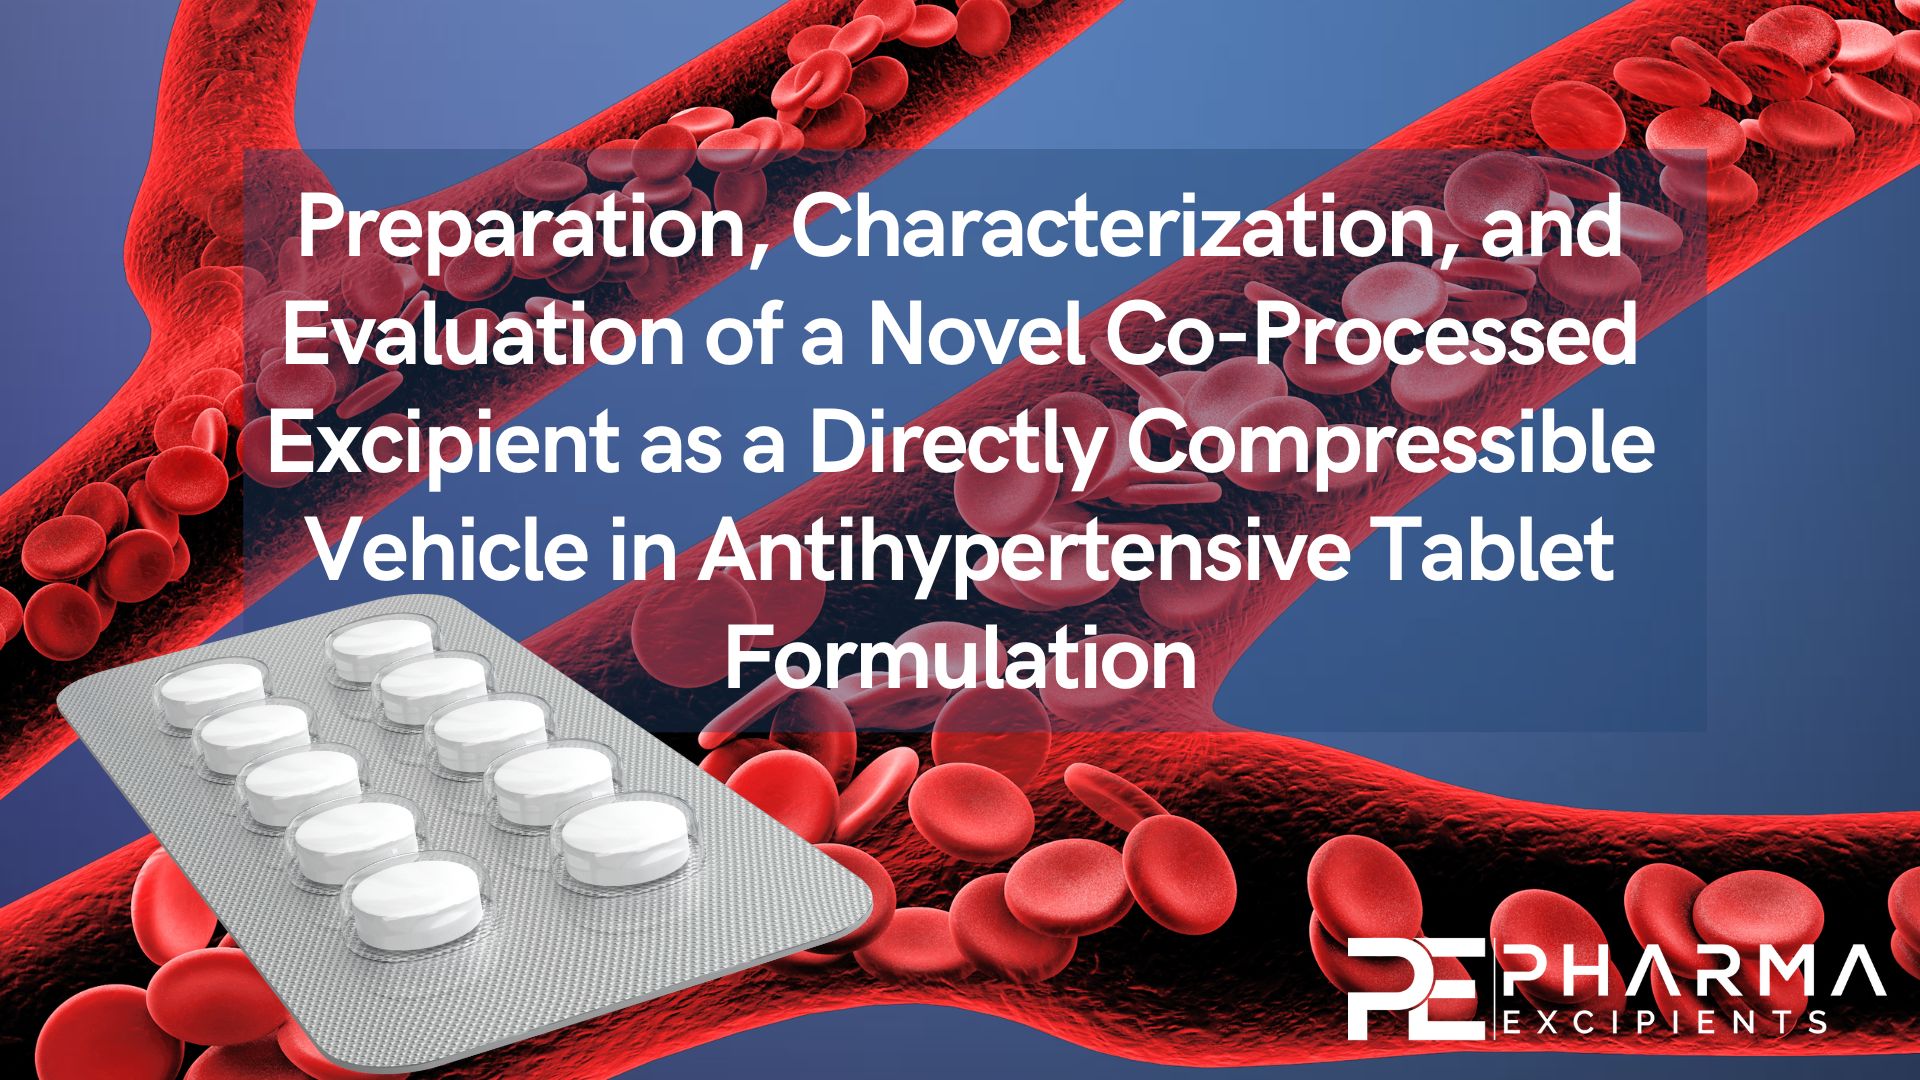 Preparation-Characterization-and-Evaluation-of-a-Novel-Co-Processed-Excipient-as-a-Directly-Compressible-Vehicle-in-Antihypertensive-Tablet-Formulation